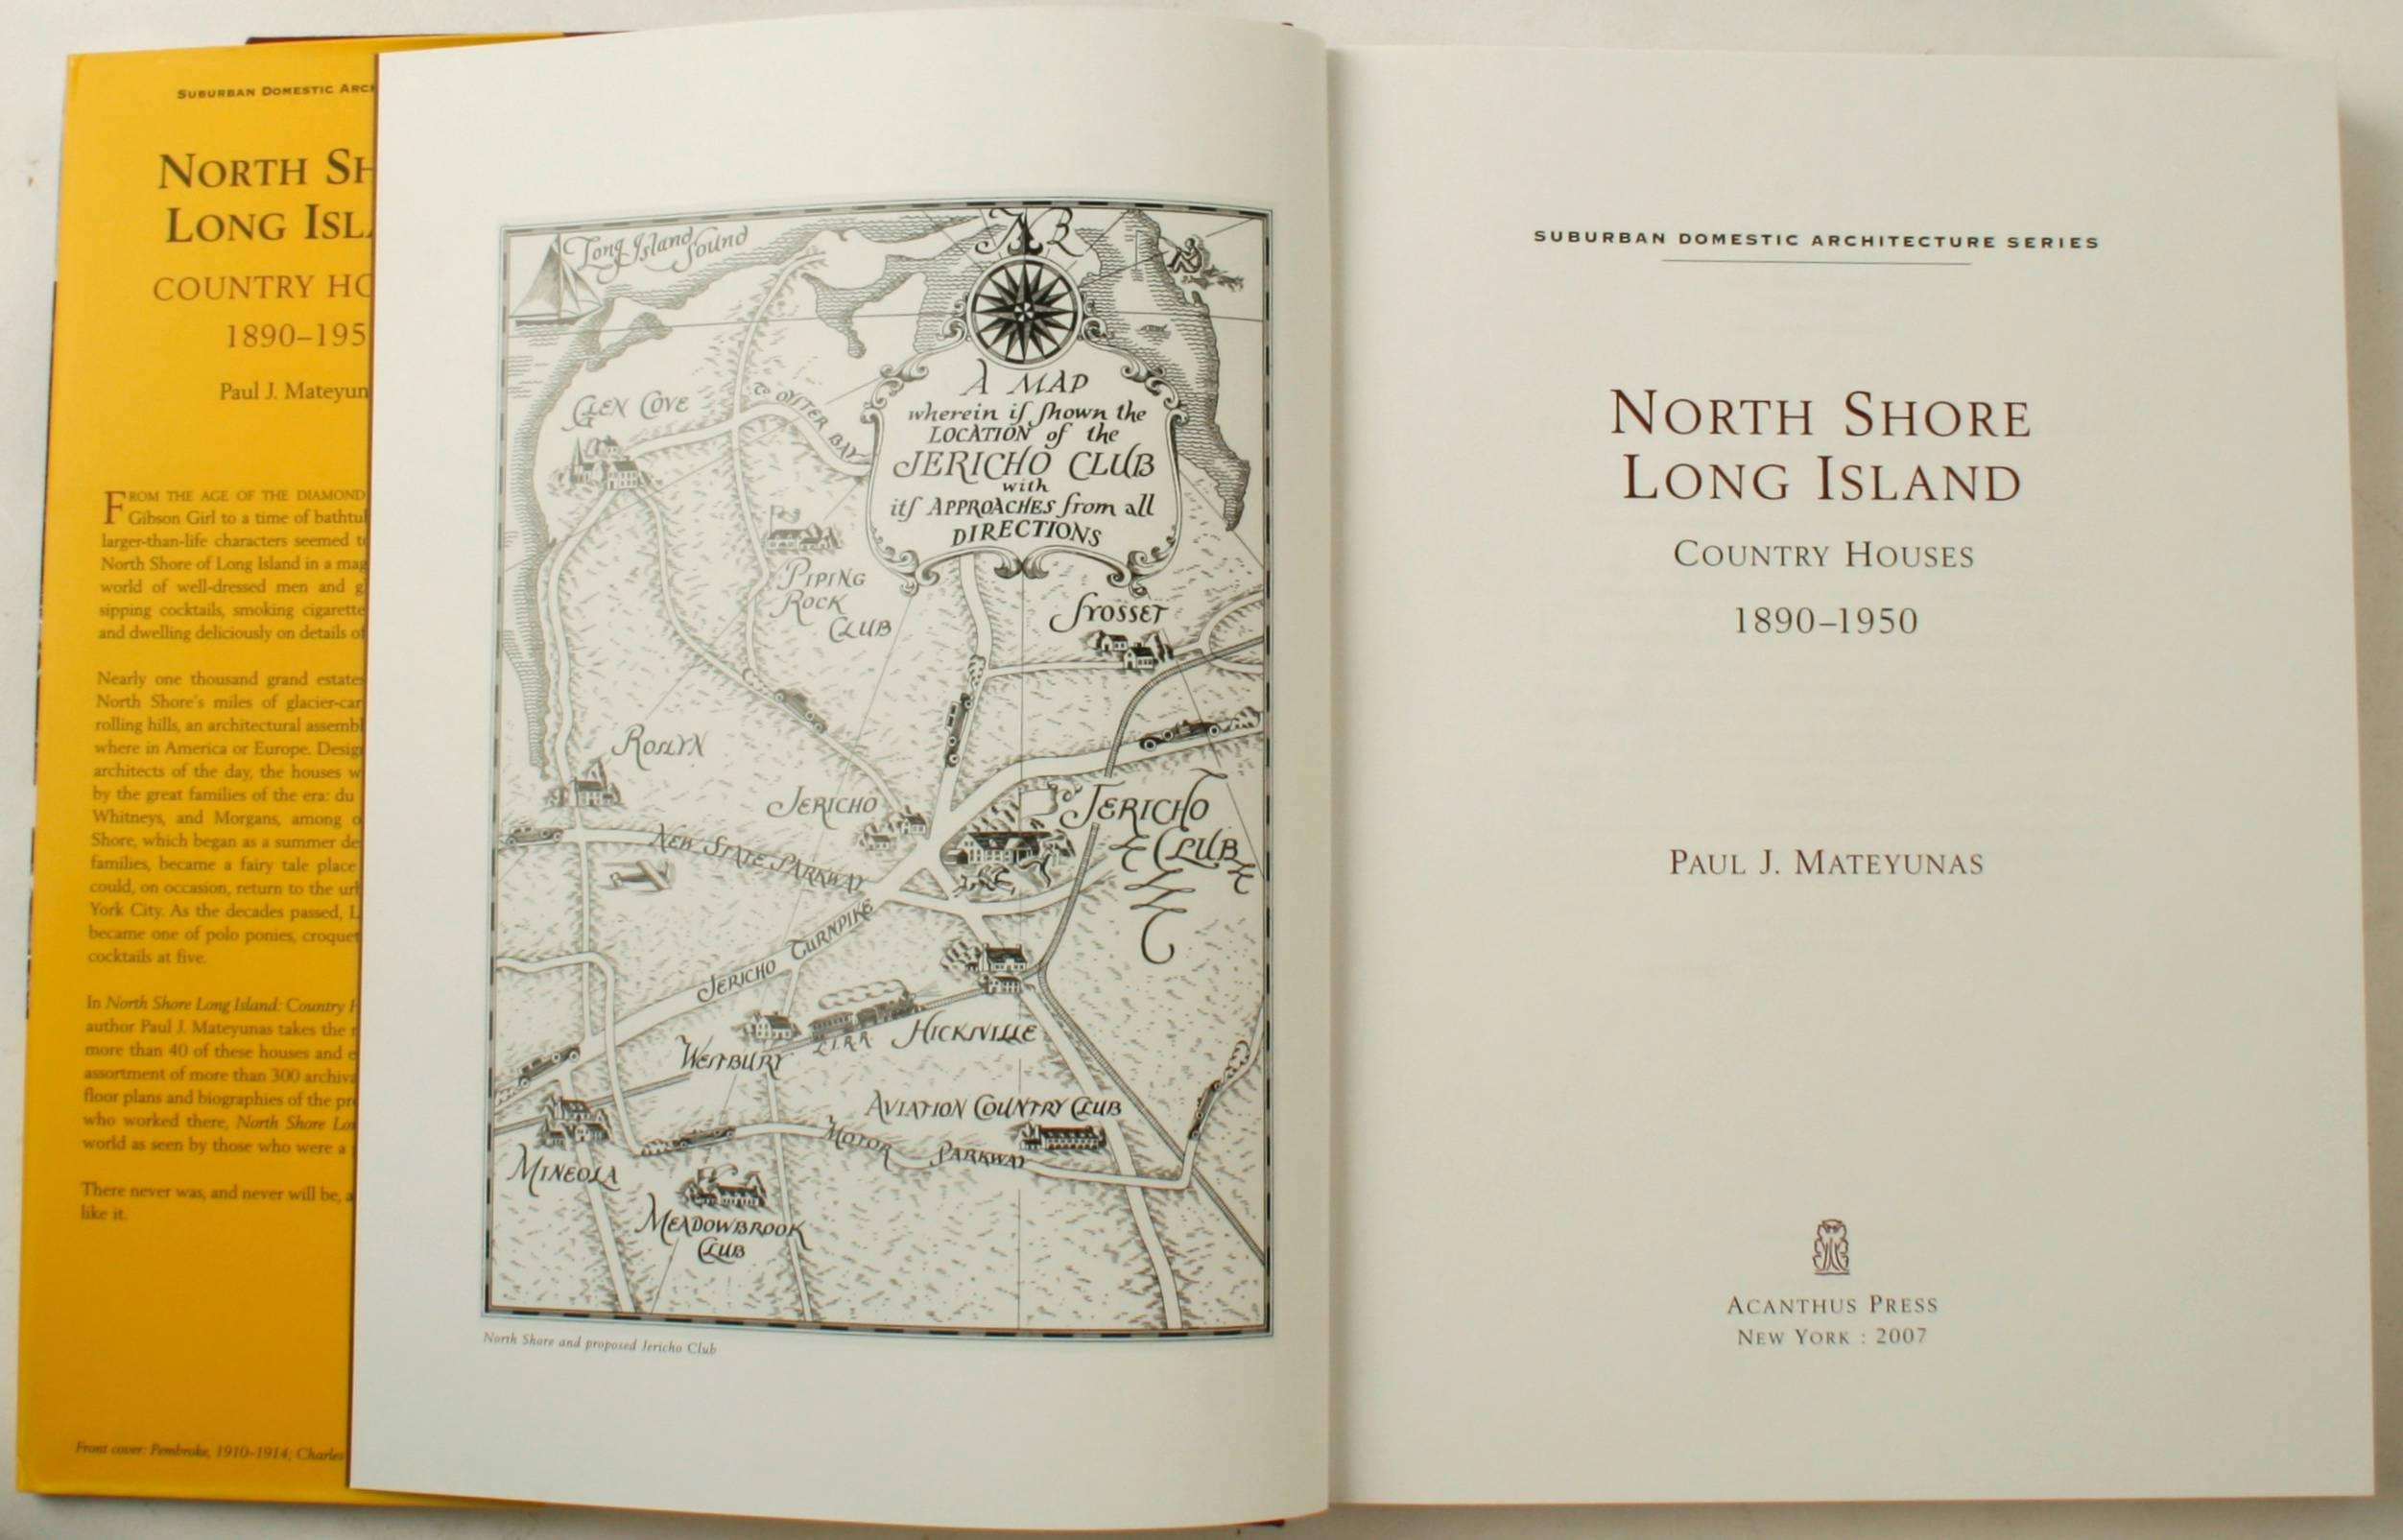 North Shore Long Island Country Houses, 1890-1950 by Paul J. Mateyunas. New York: Acanthus Press. First edition hardcover with dust jacket, 2007. 365 pp. A tour of more than 40 historical estates on the North Shore of Long Island. At one point the